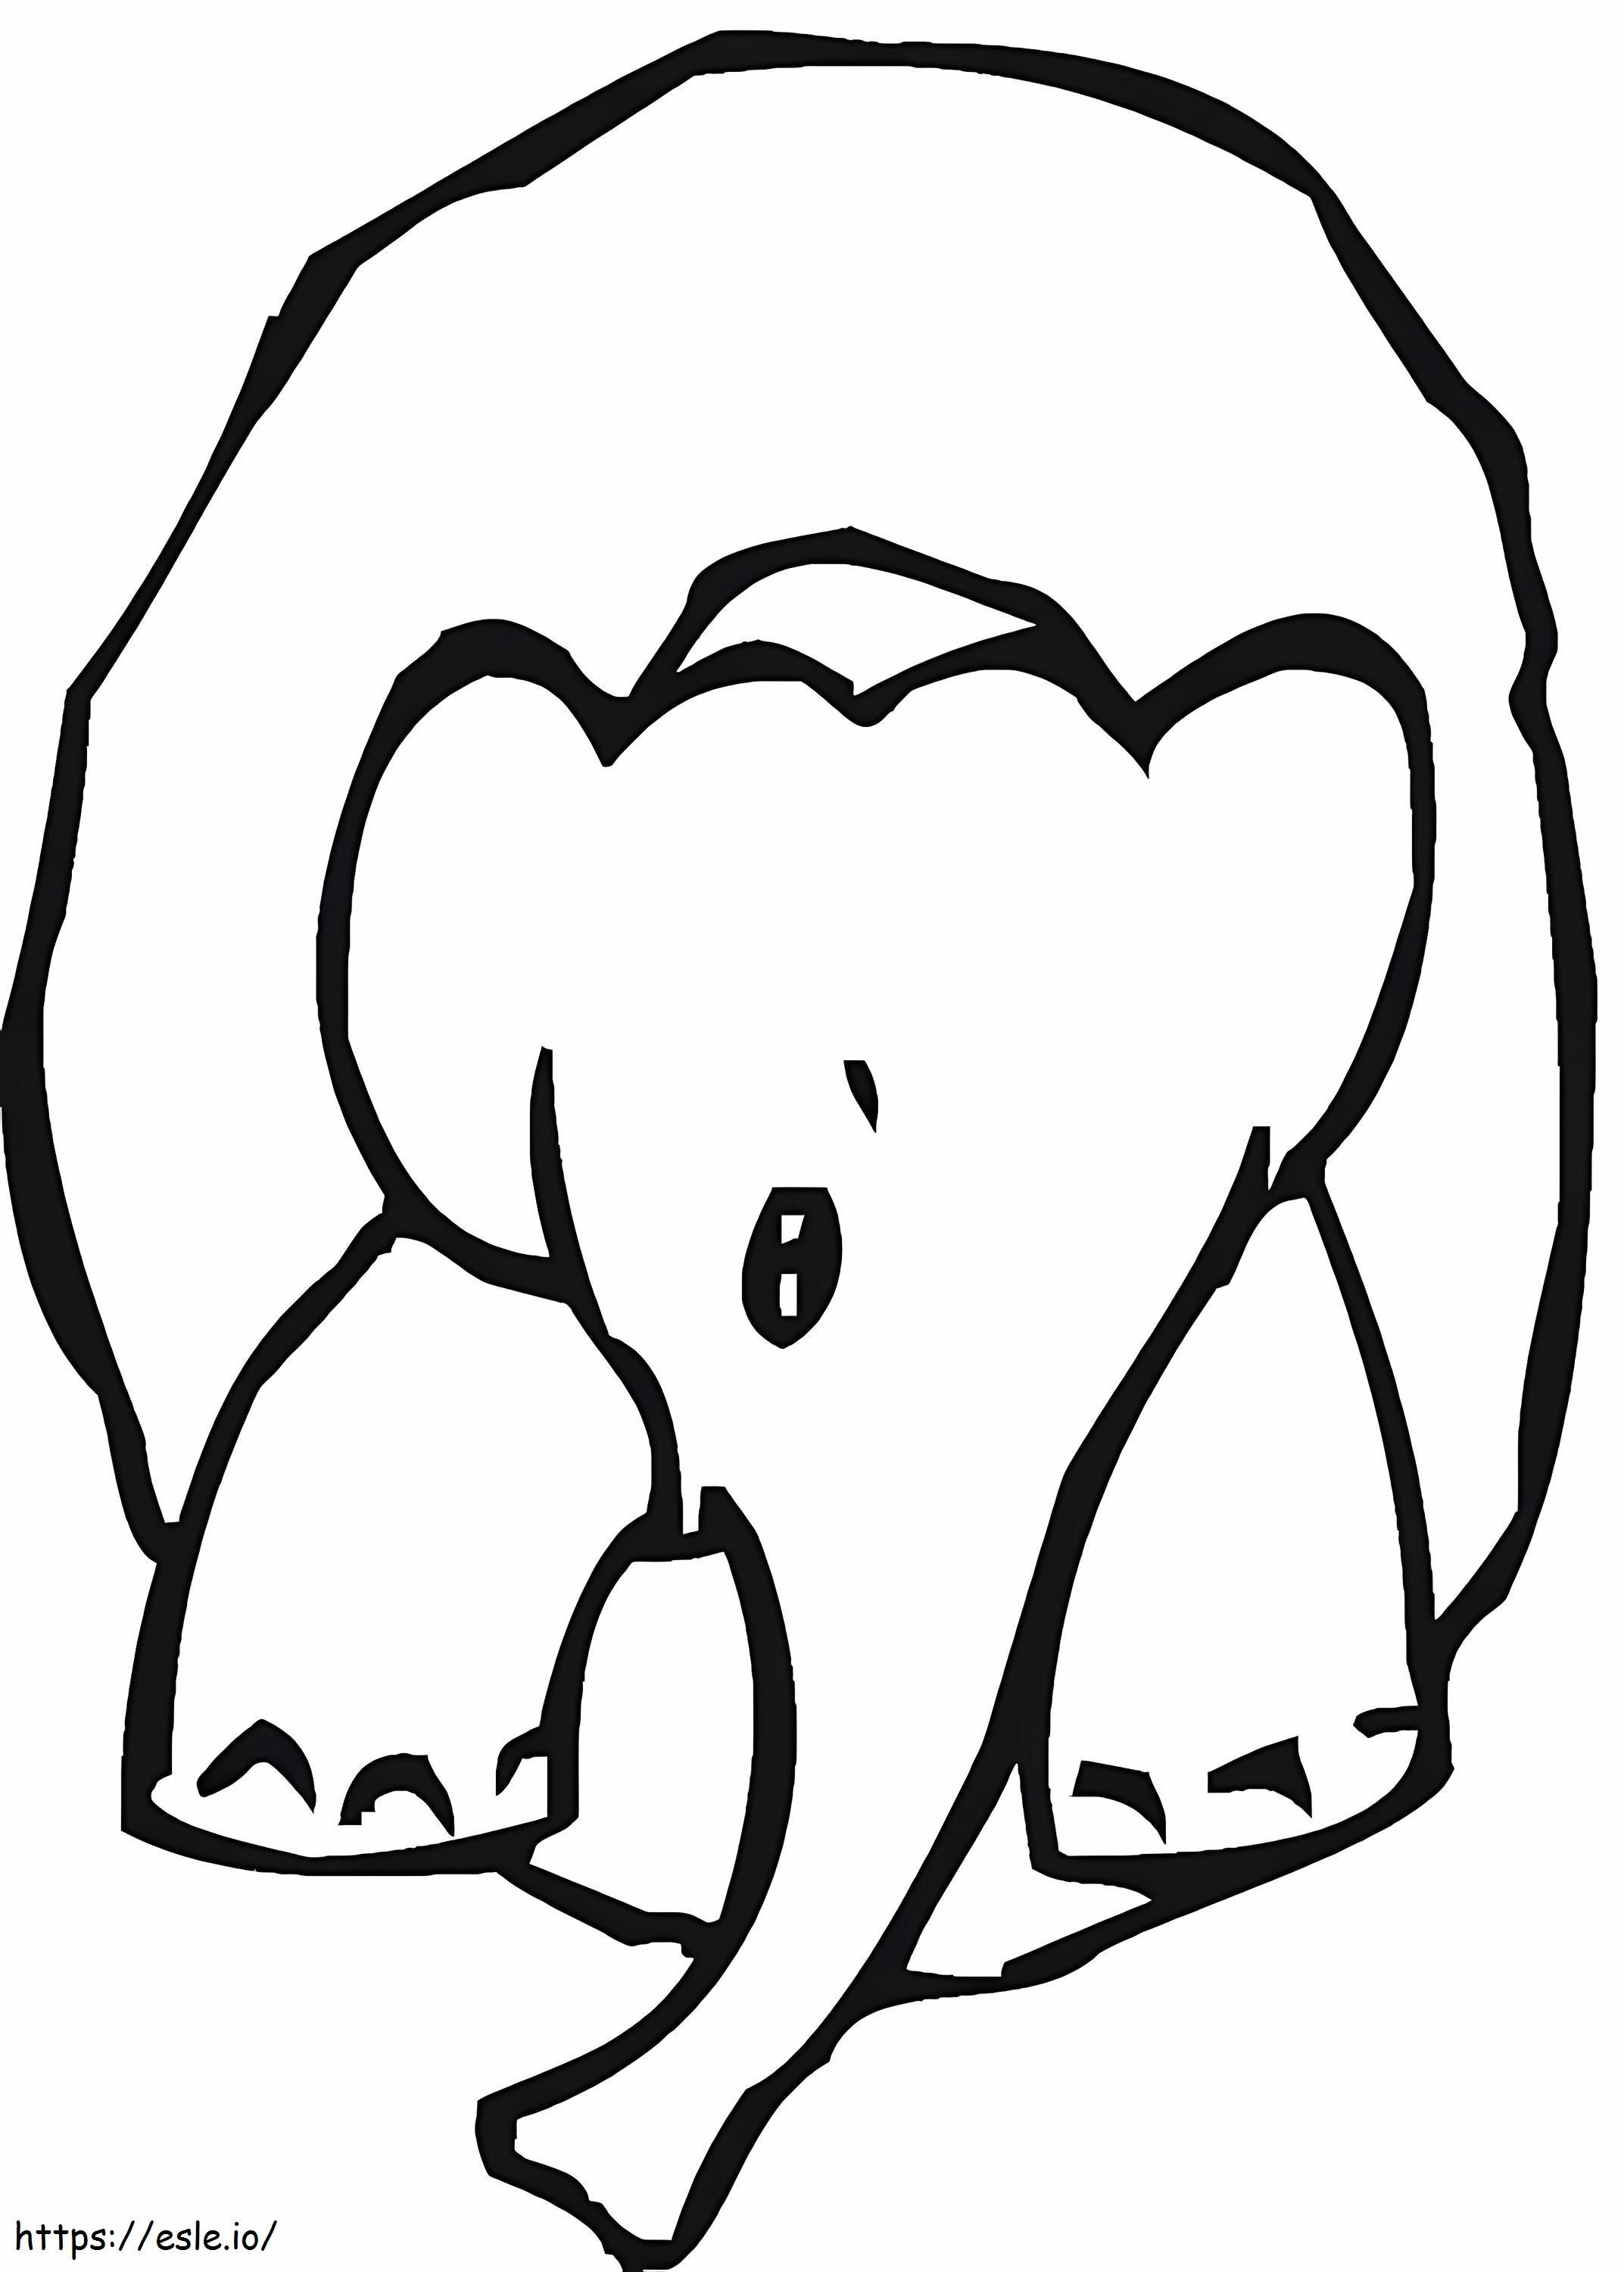 Elephant In Number 0 coloring page